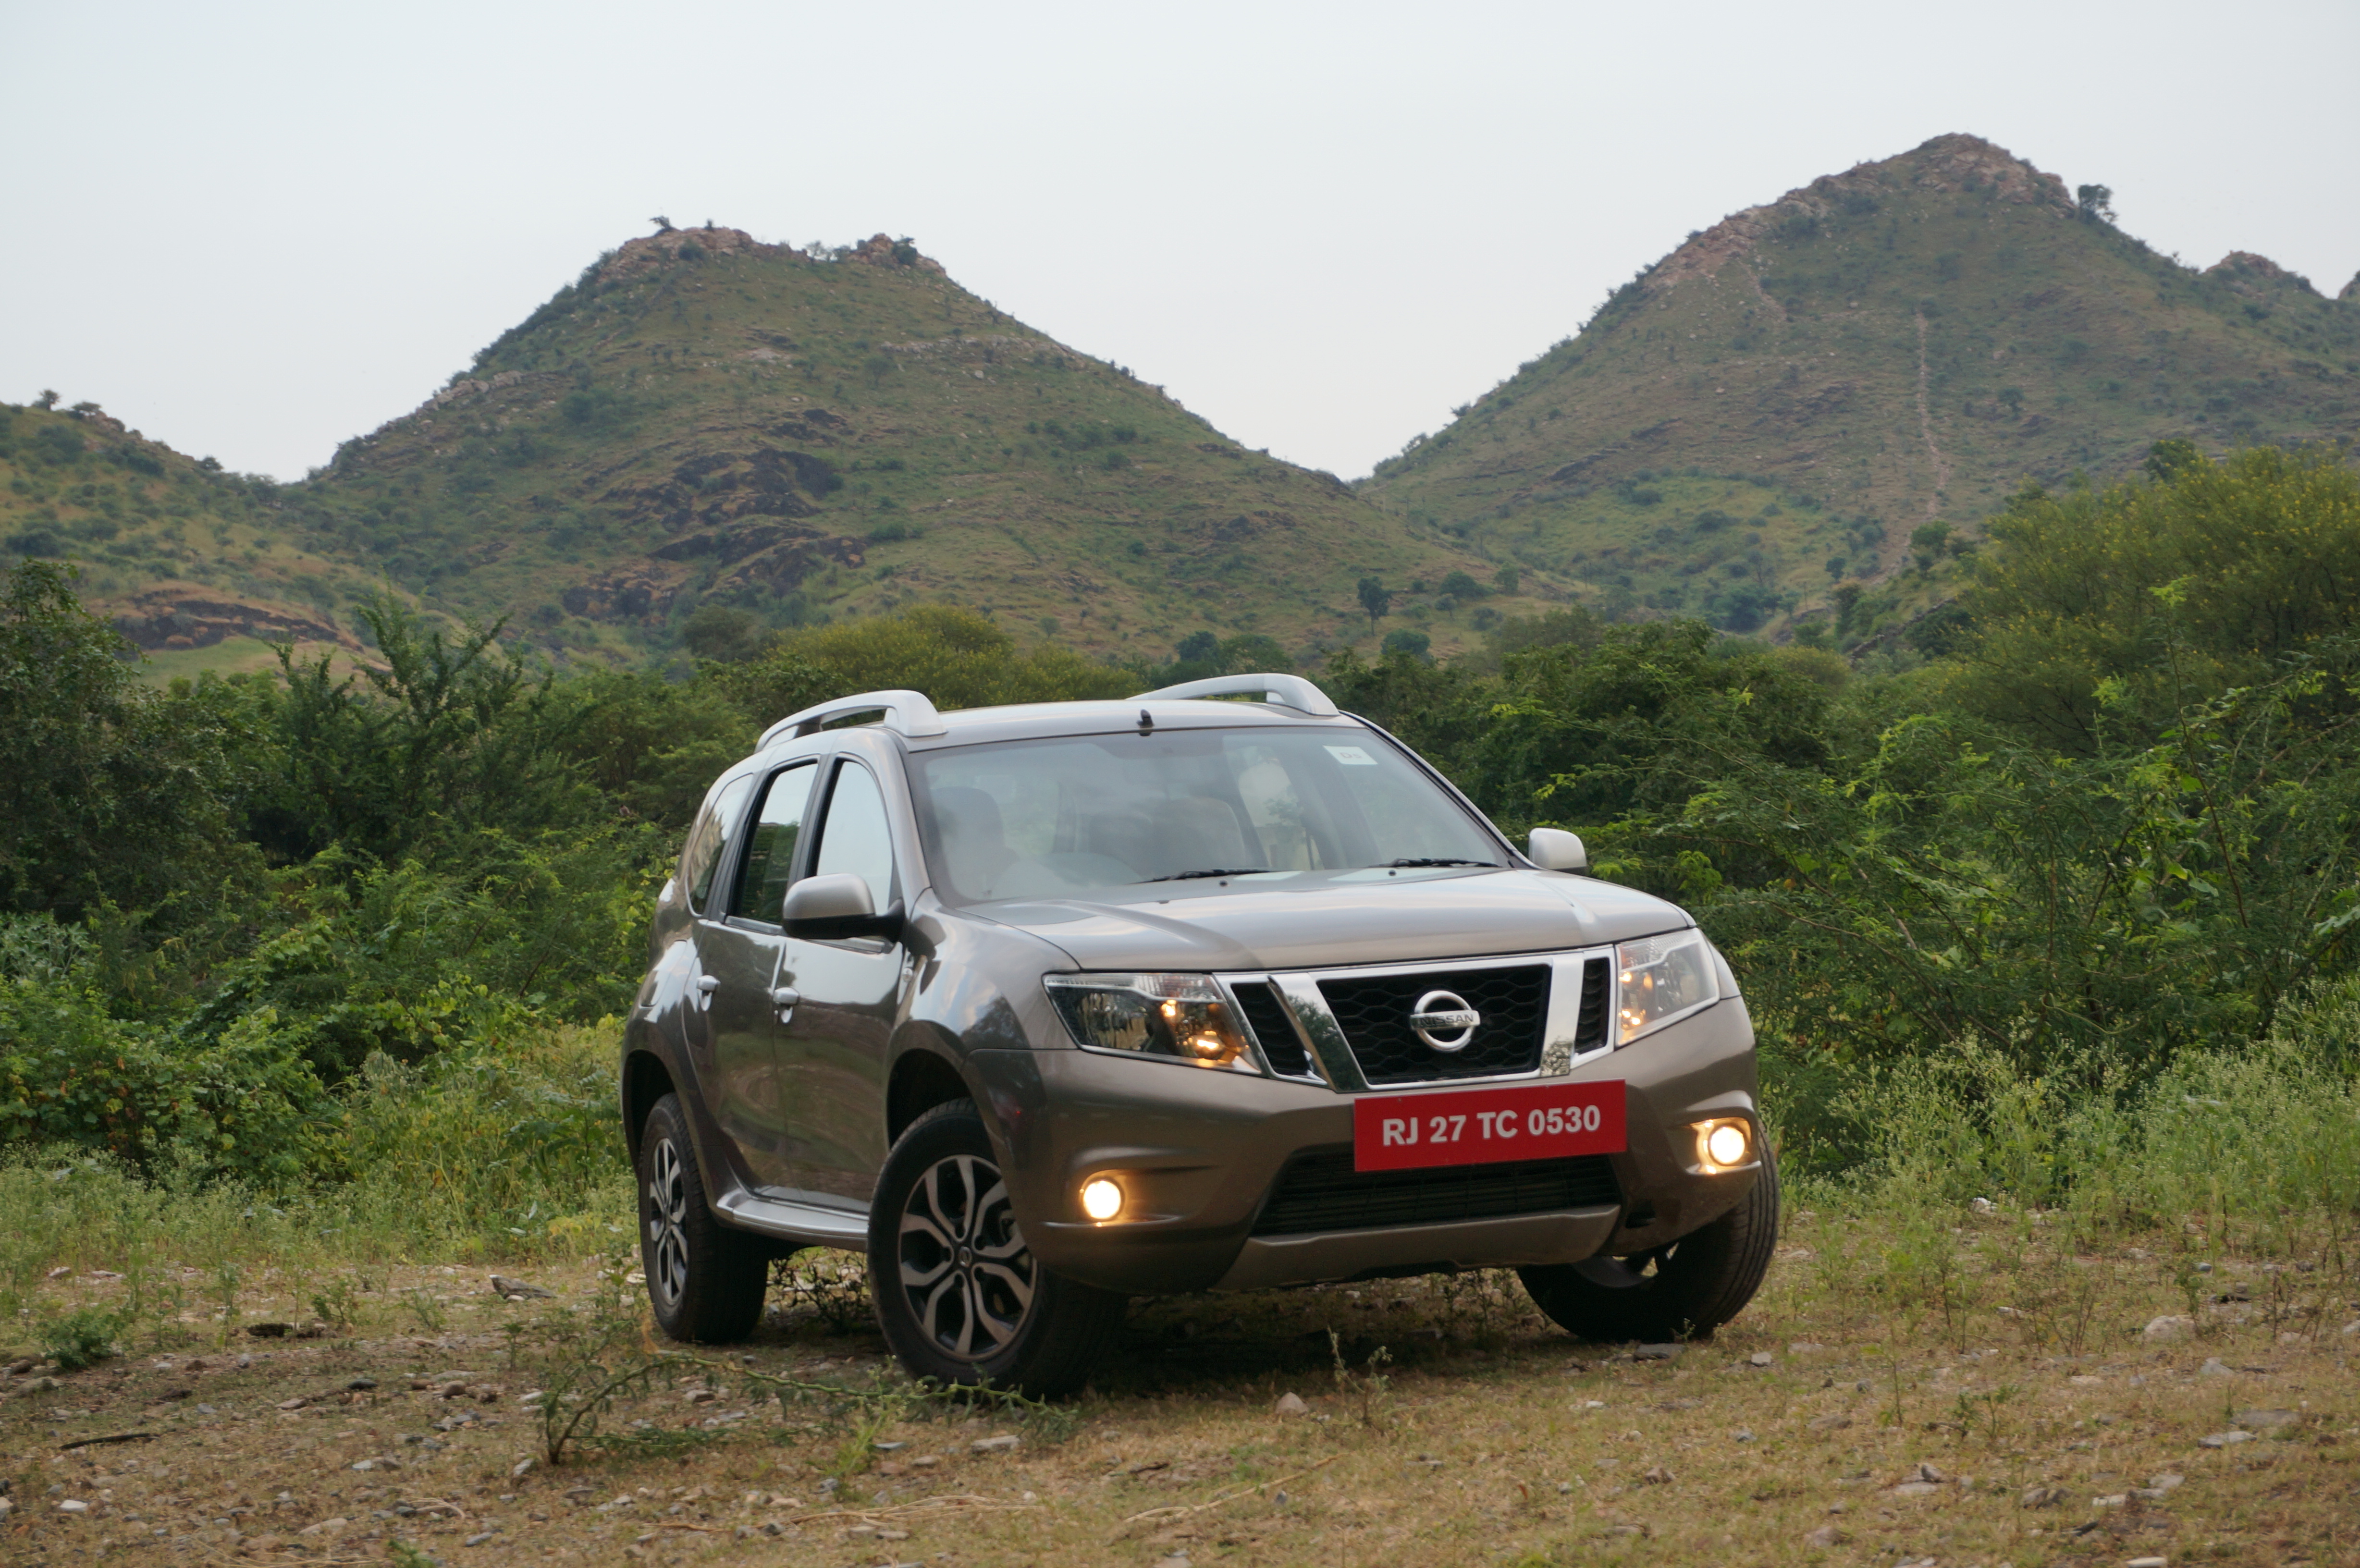 Nissan offering benefits up to Rs. 1.45 lakh